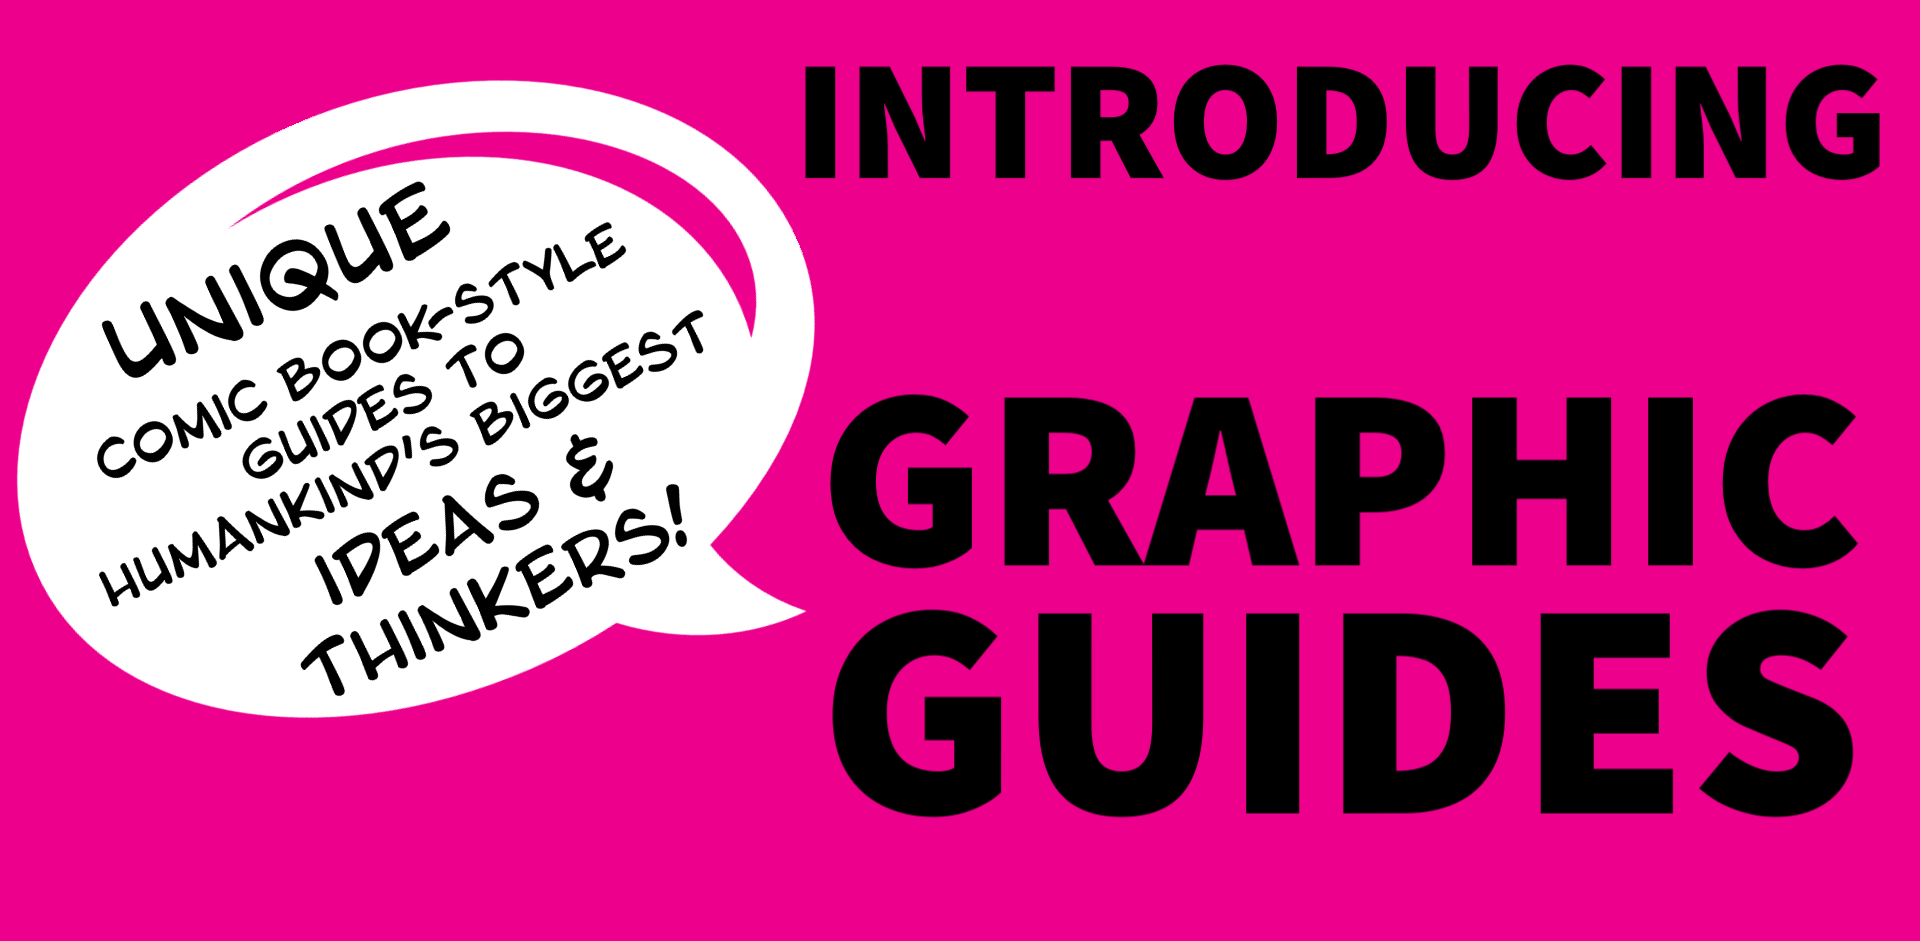 Introducing Graphic Guides